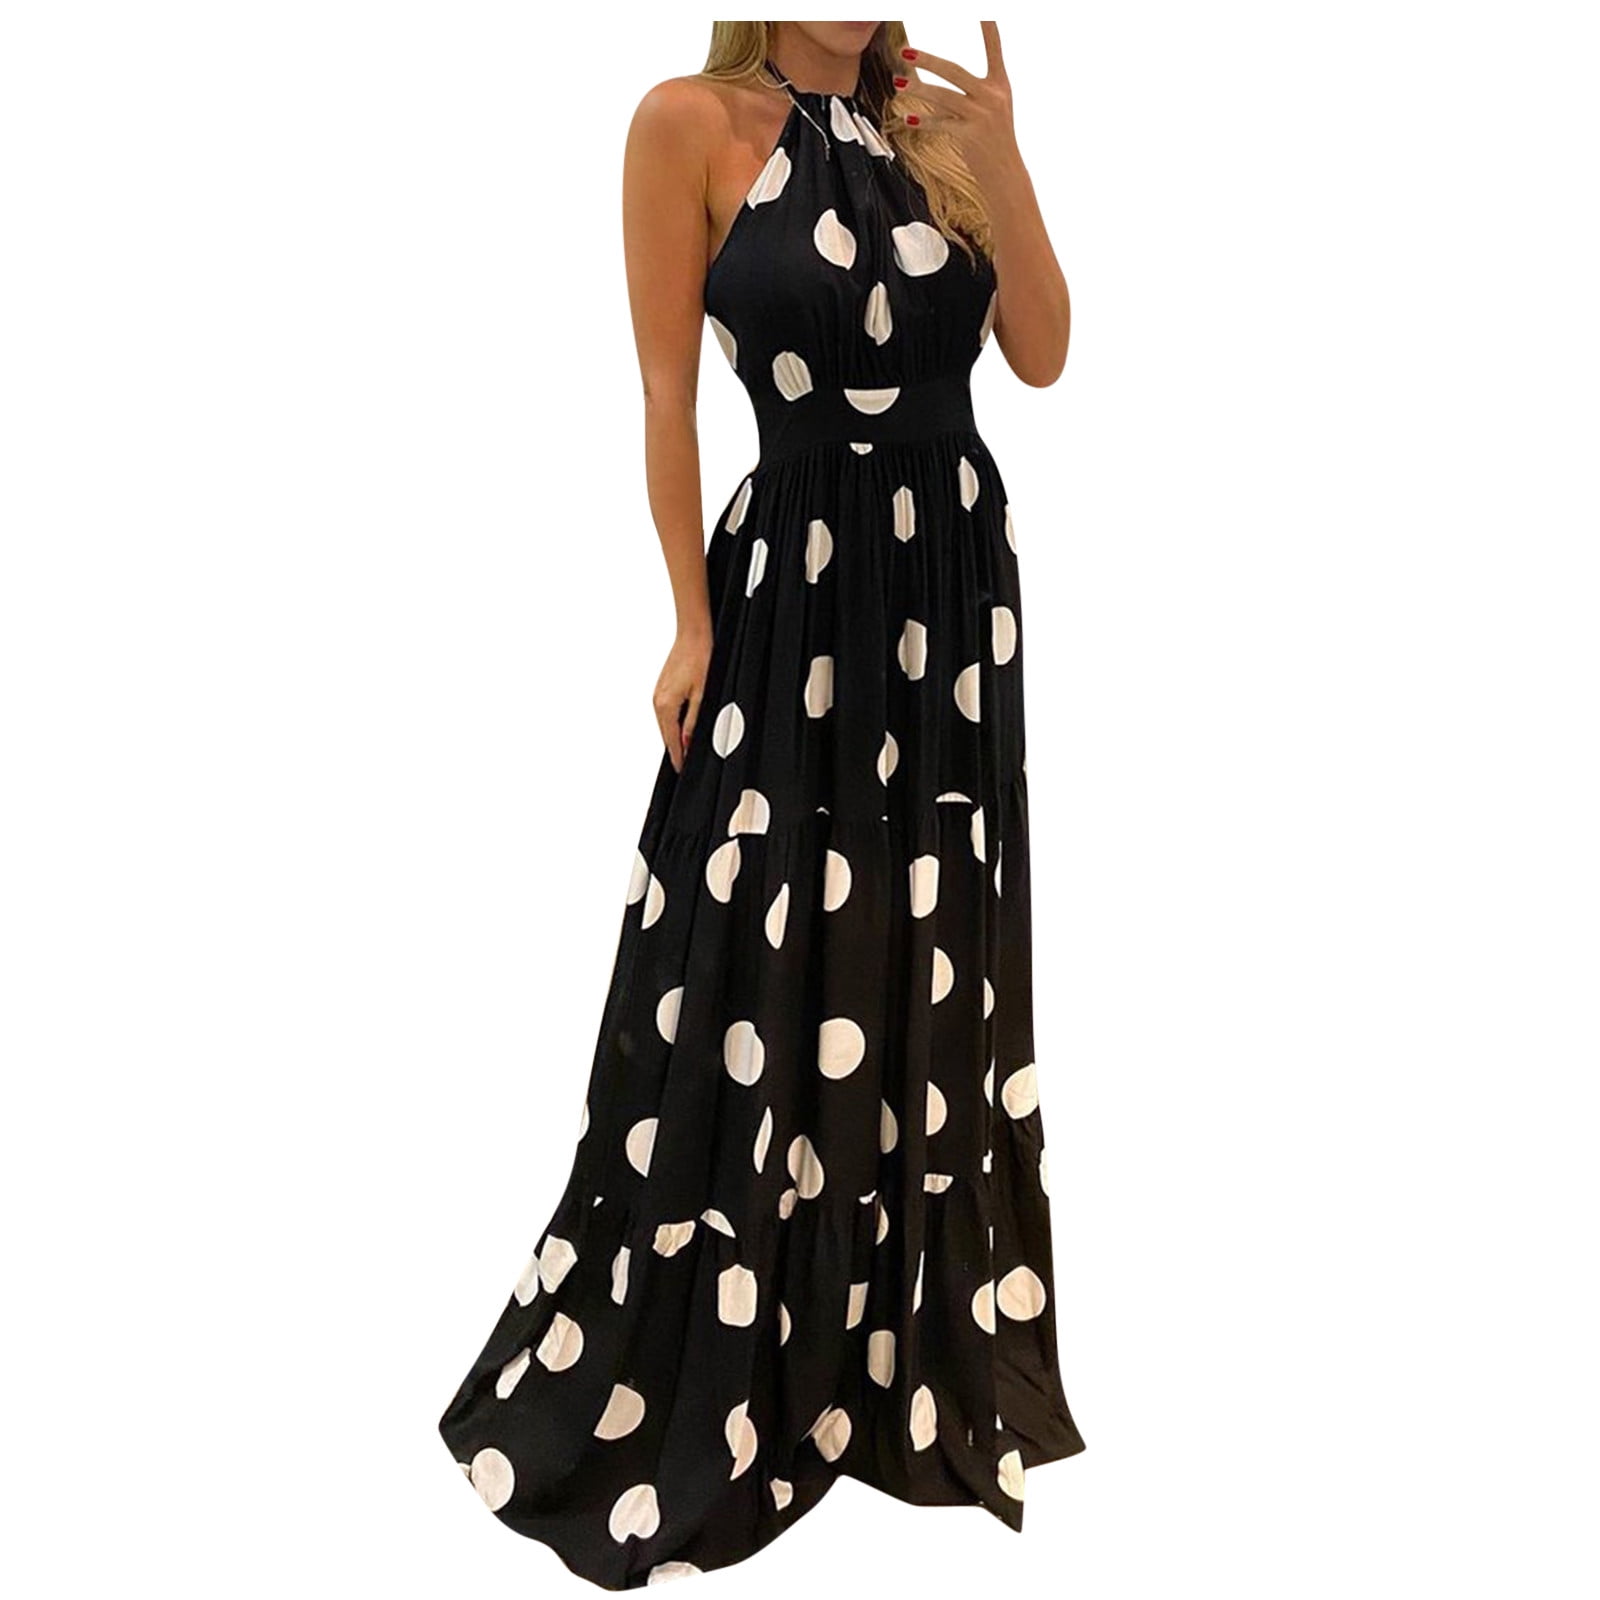 Giftesty Dresses for Women Clearance ...